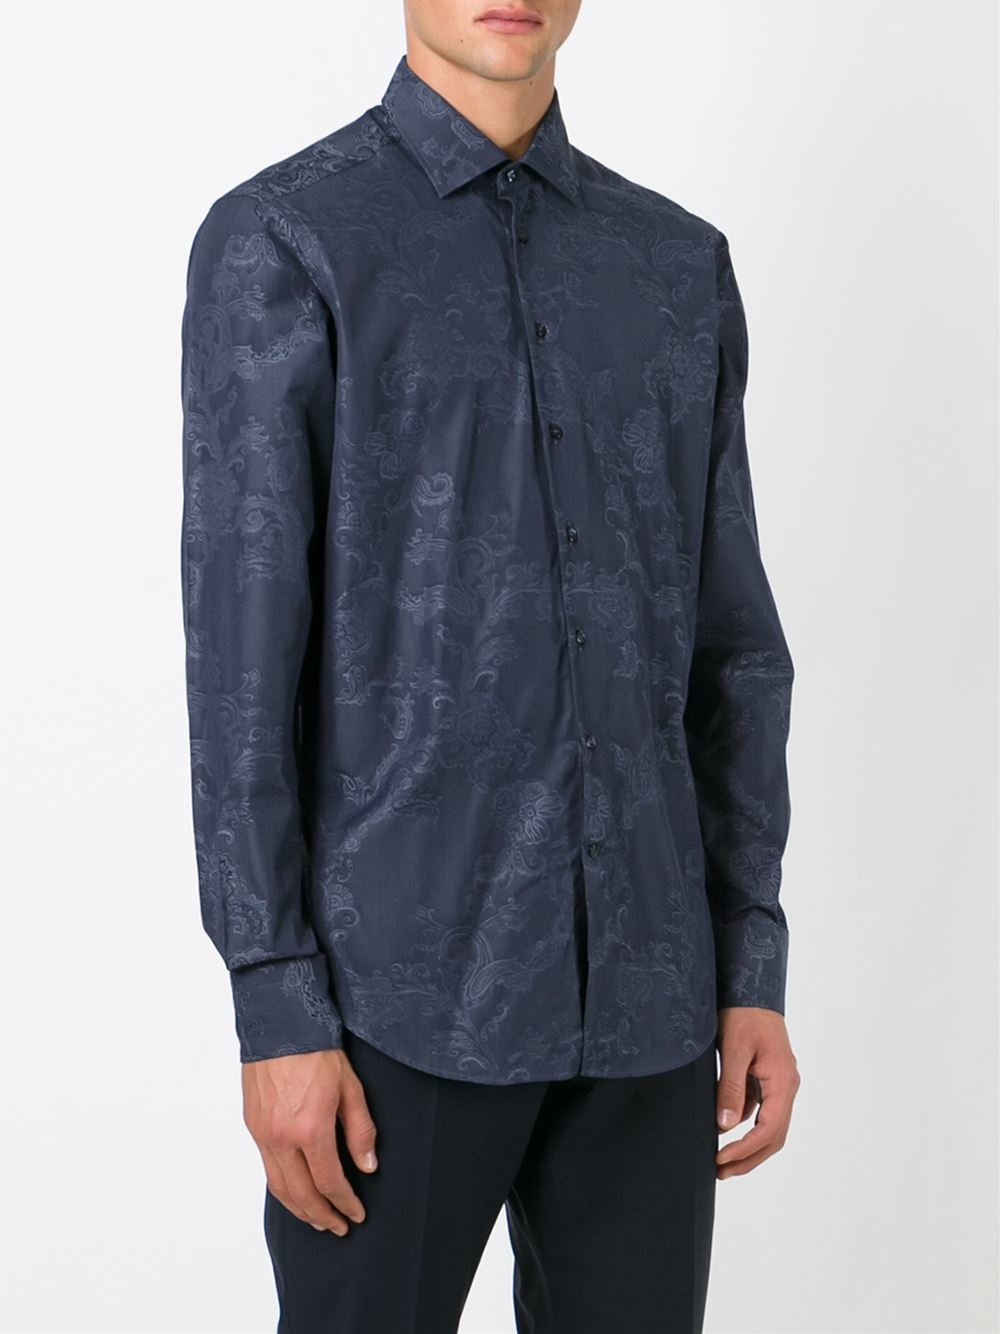 Etro Paisley Shirt in Blue for Men | Lyst